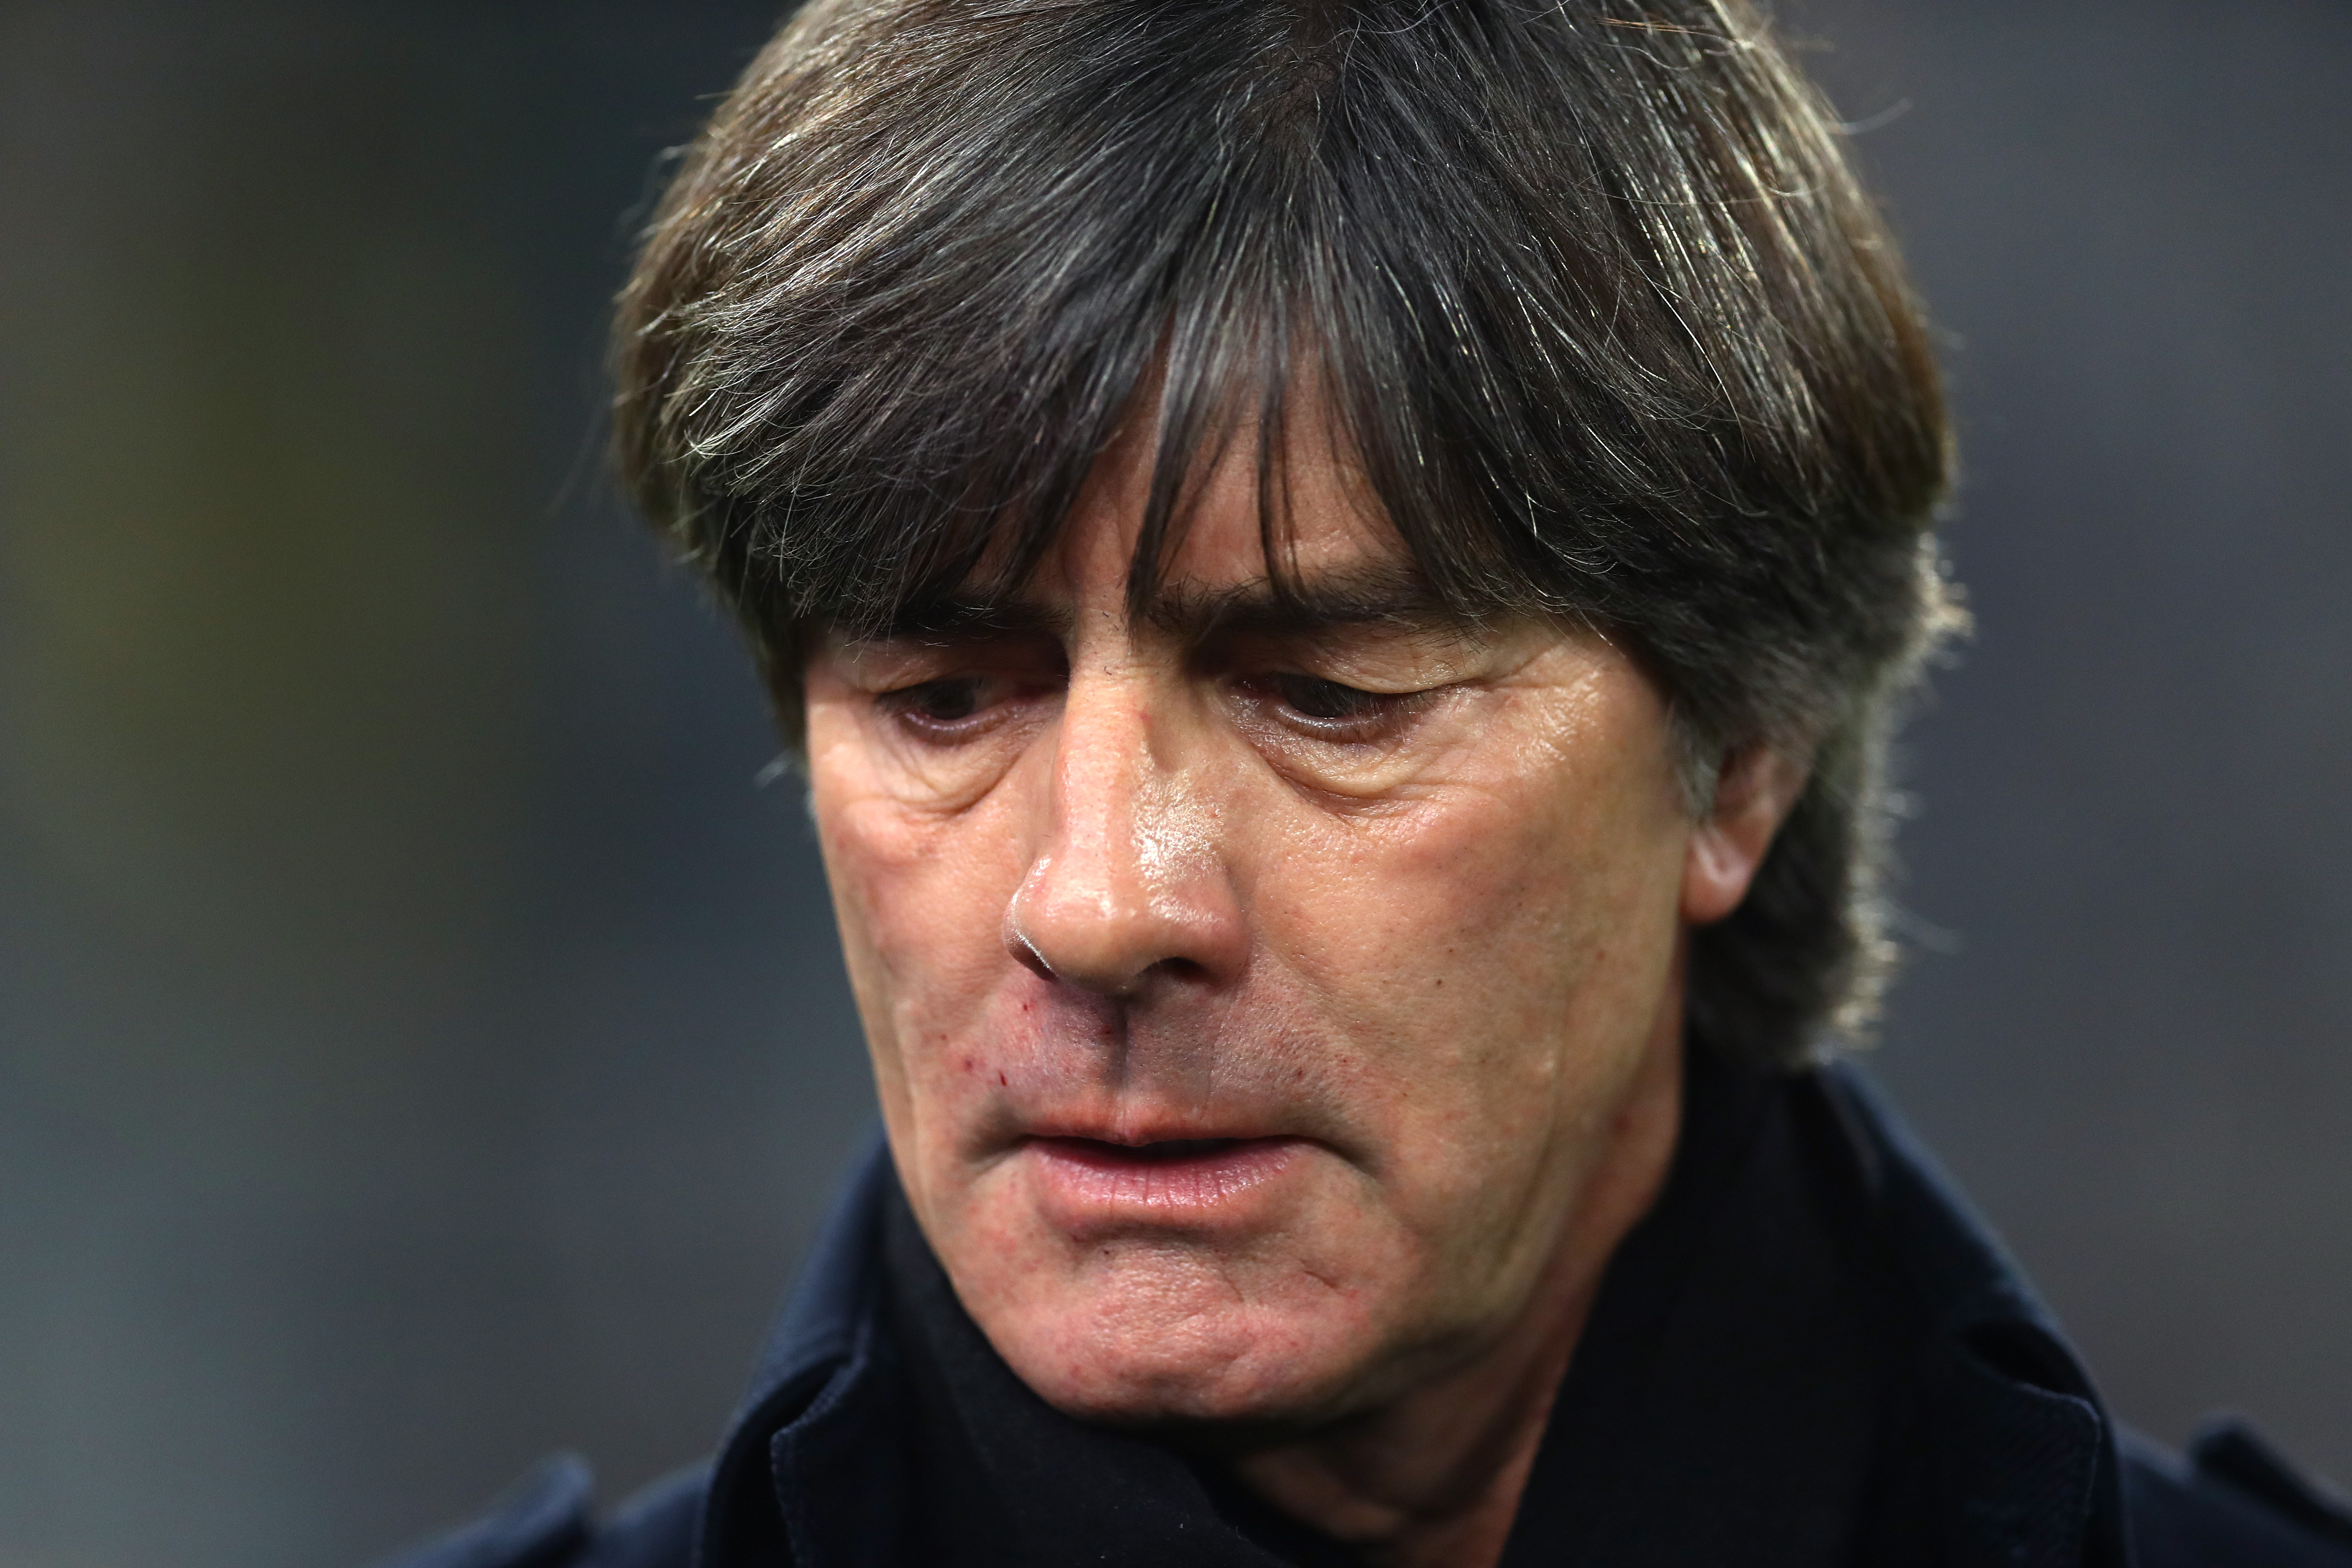 DORTMUND, GERMANY - OCTOBER 09: Joachim Loew, Manager of Germany looks on prior to the International Friendly match between Germany and Argentina at Signal Iduna Park on October 09, 2019 in Dortmund, Germany. (Photo by Lars Baron/Bongarts/Getty Images)